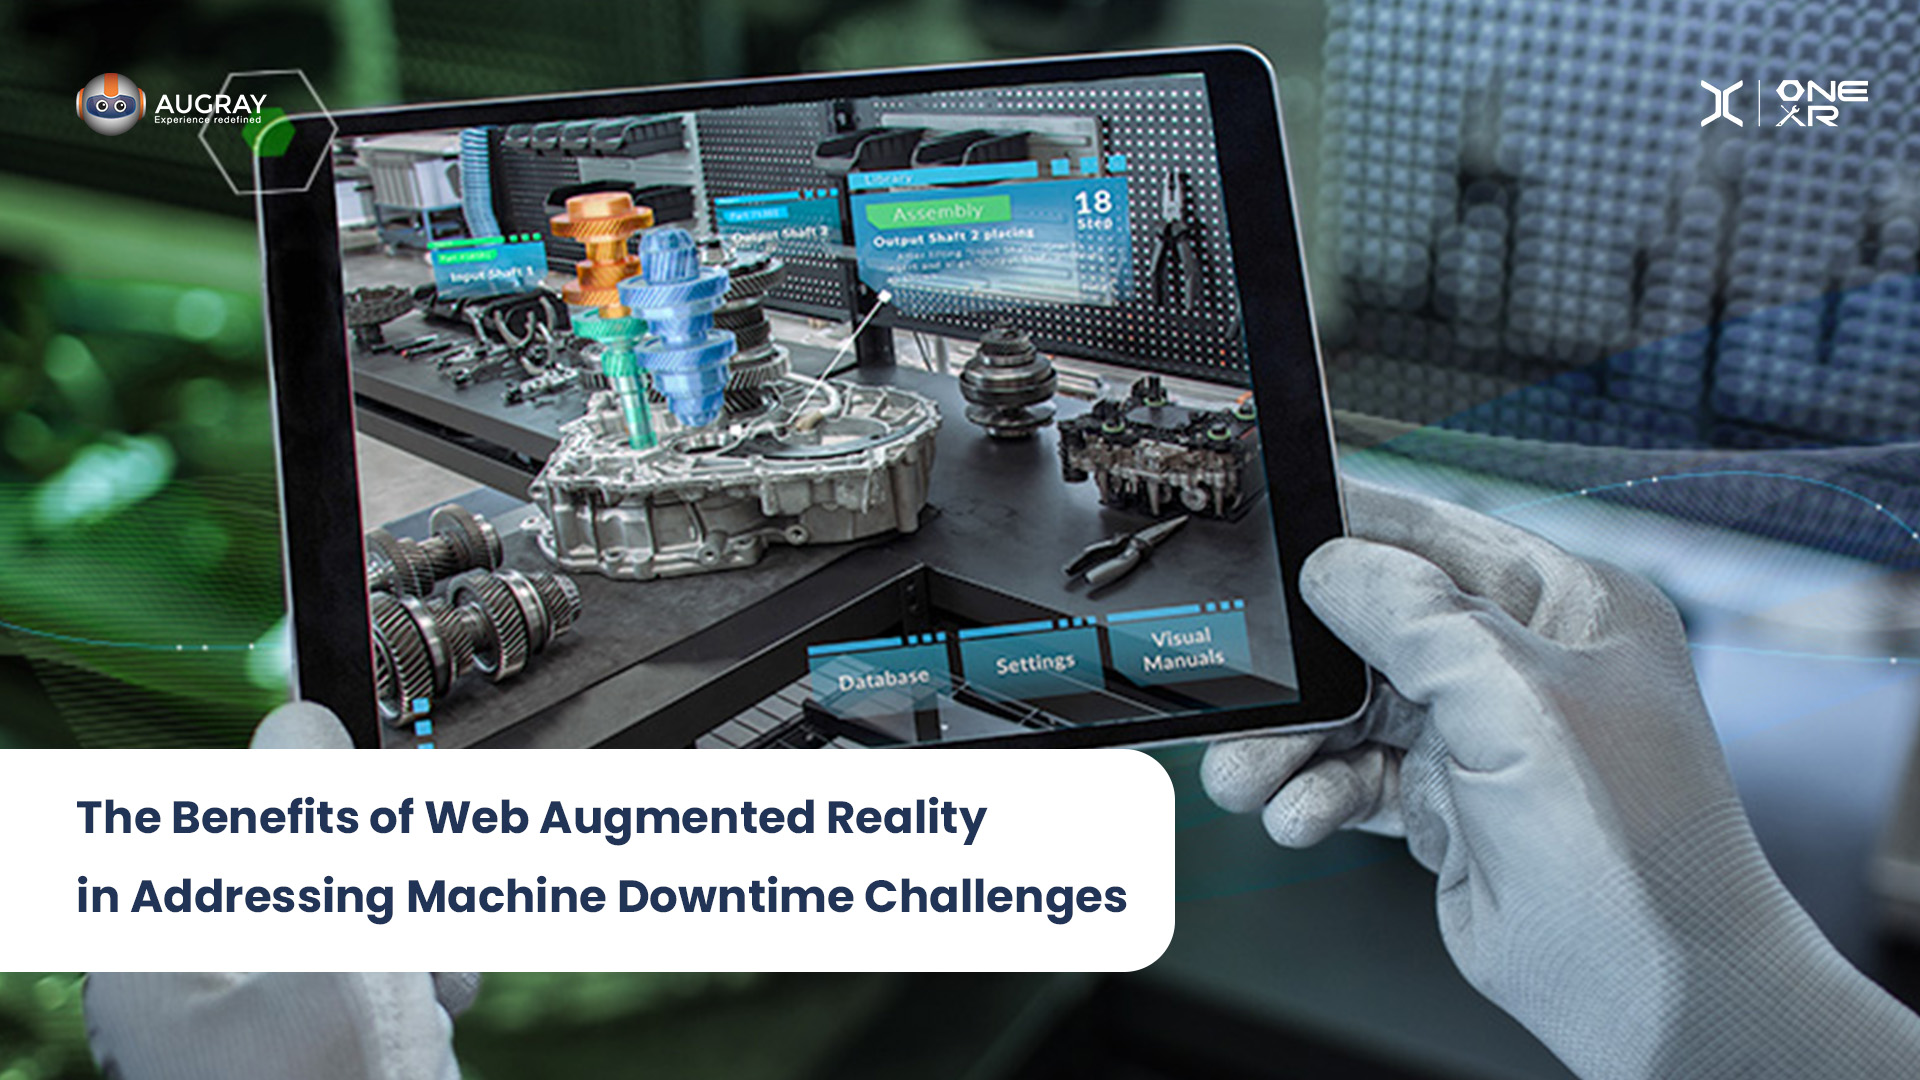 The Benefits of Web Augmented Reality in Addressing Machine Downtime Challenges  - Augray Blog